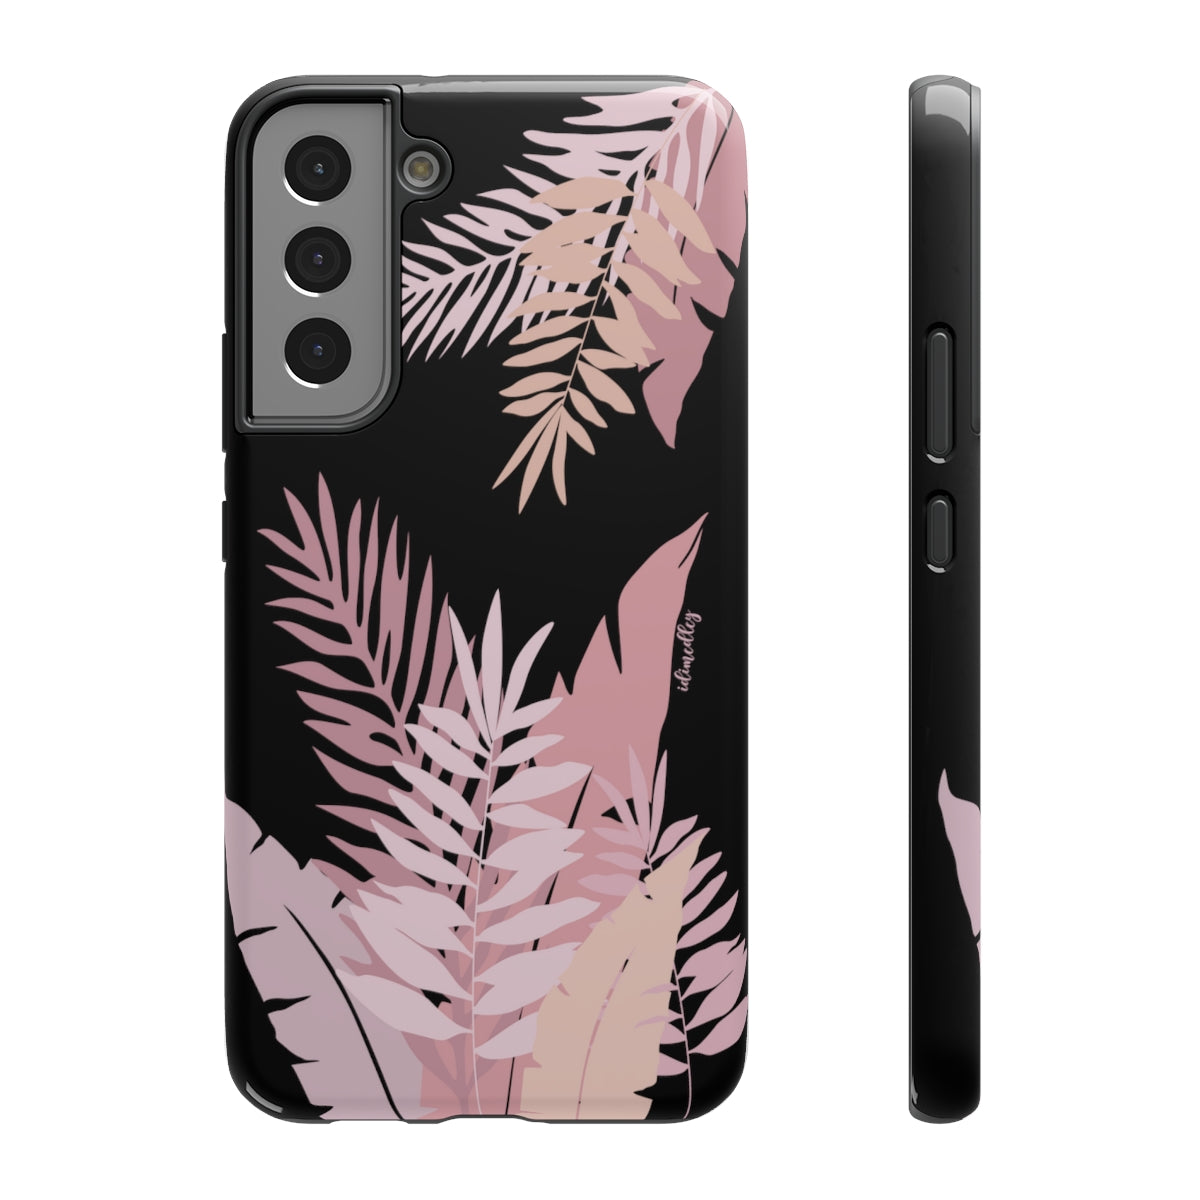 Whispering Leaves (Pink and Black)